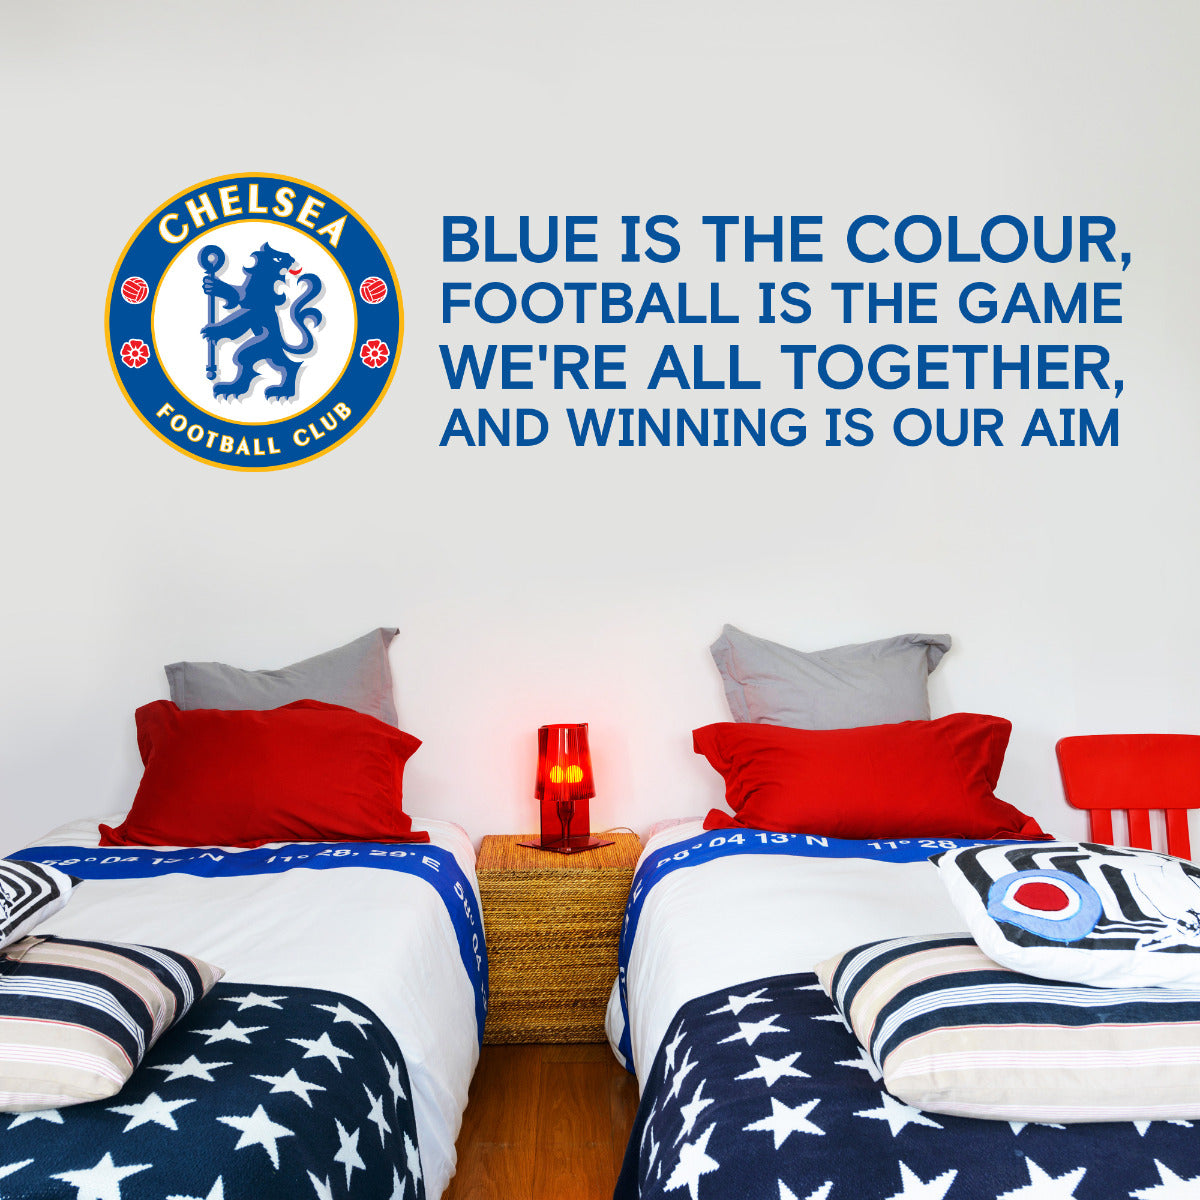 Chelsea Crest Blue Is The Colour Song Wall Mural Sticker